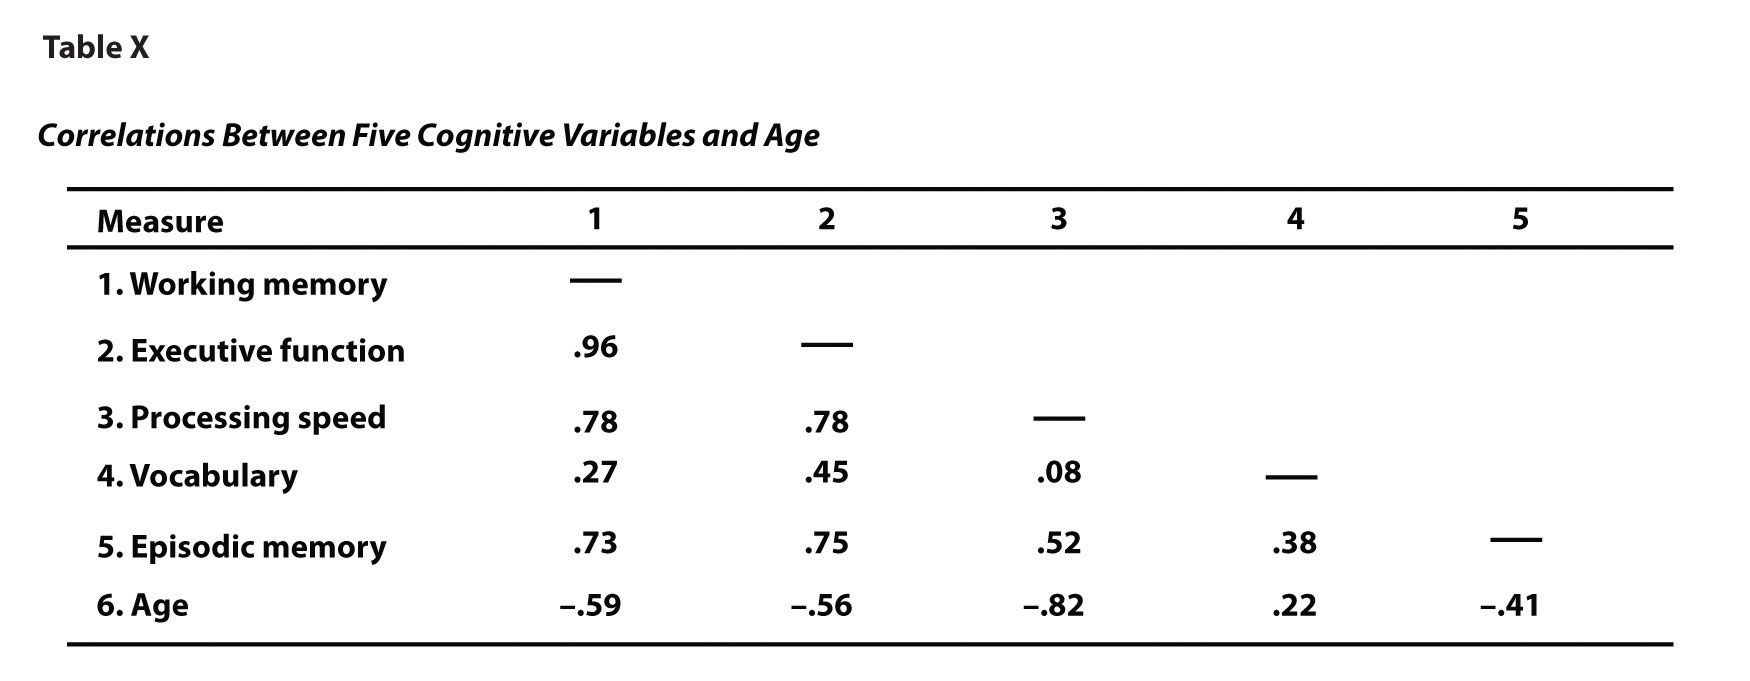 Sample APA-Style Table (Correlation Matrix) Based on Research by McCabe and Colleagues